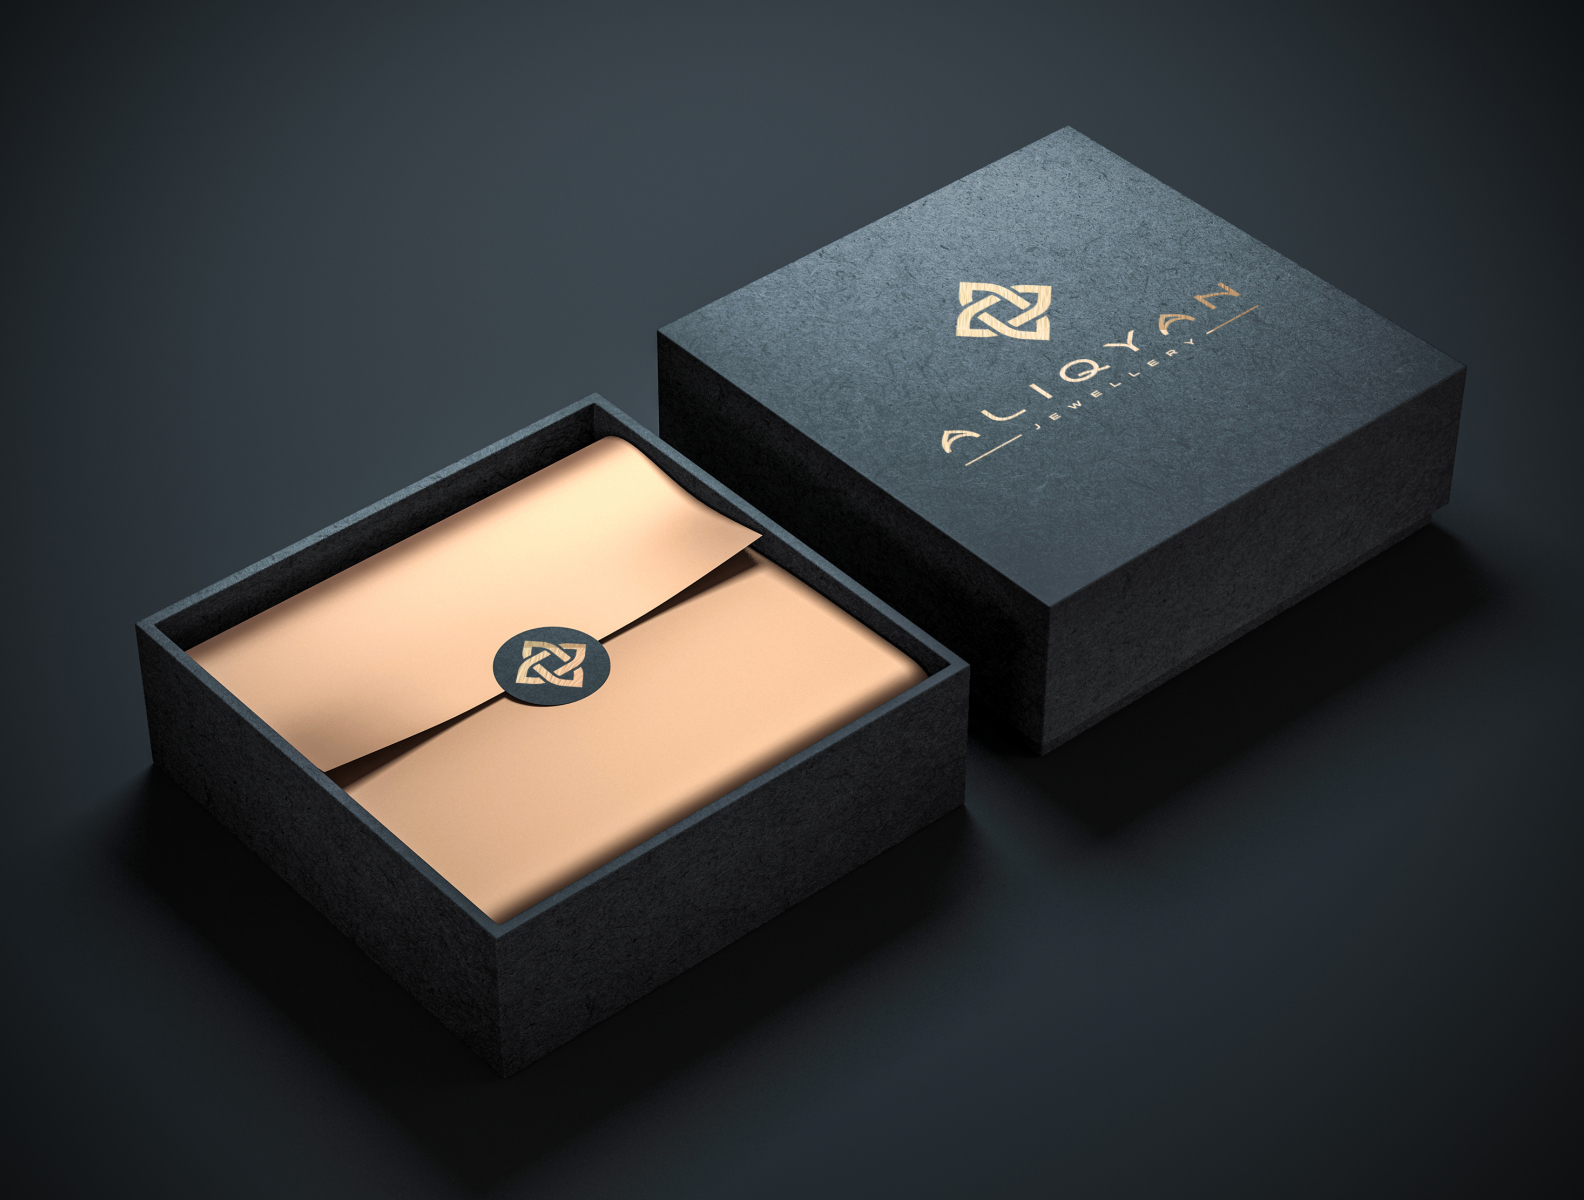 Luxury Box Mockup ALIQYAN Packaging Design by PANTER on Dribbble